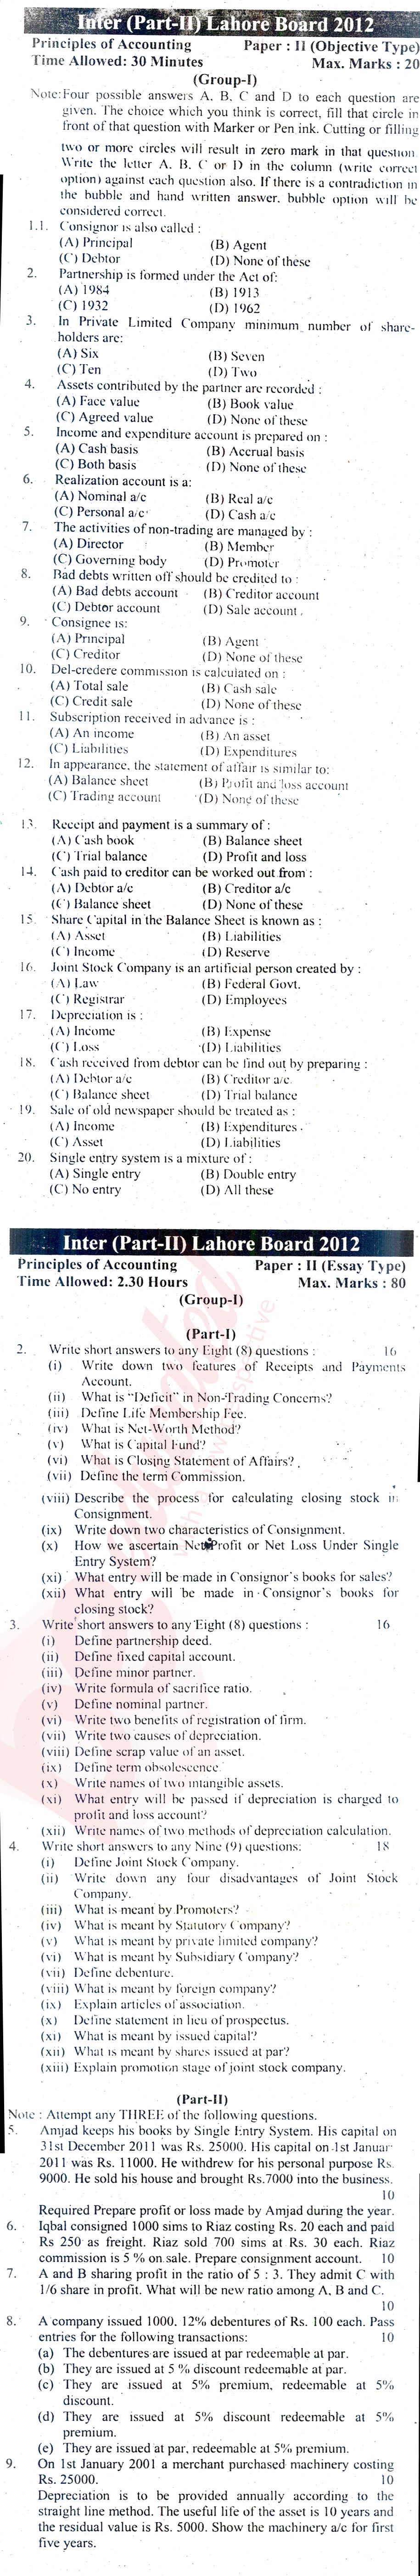 Principles of Accounting ICOM Part 2 Past Paper Group 1 BISE Lahore 2012